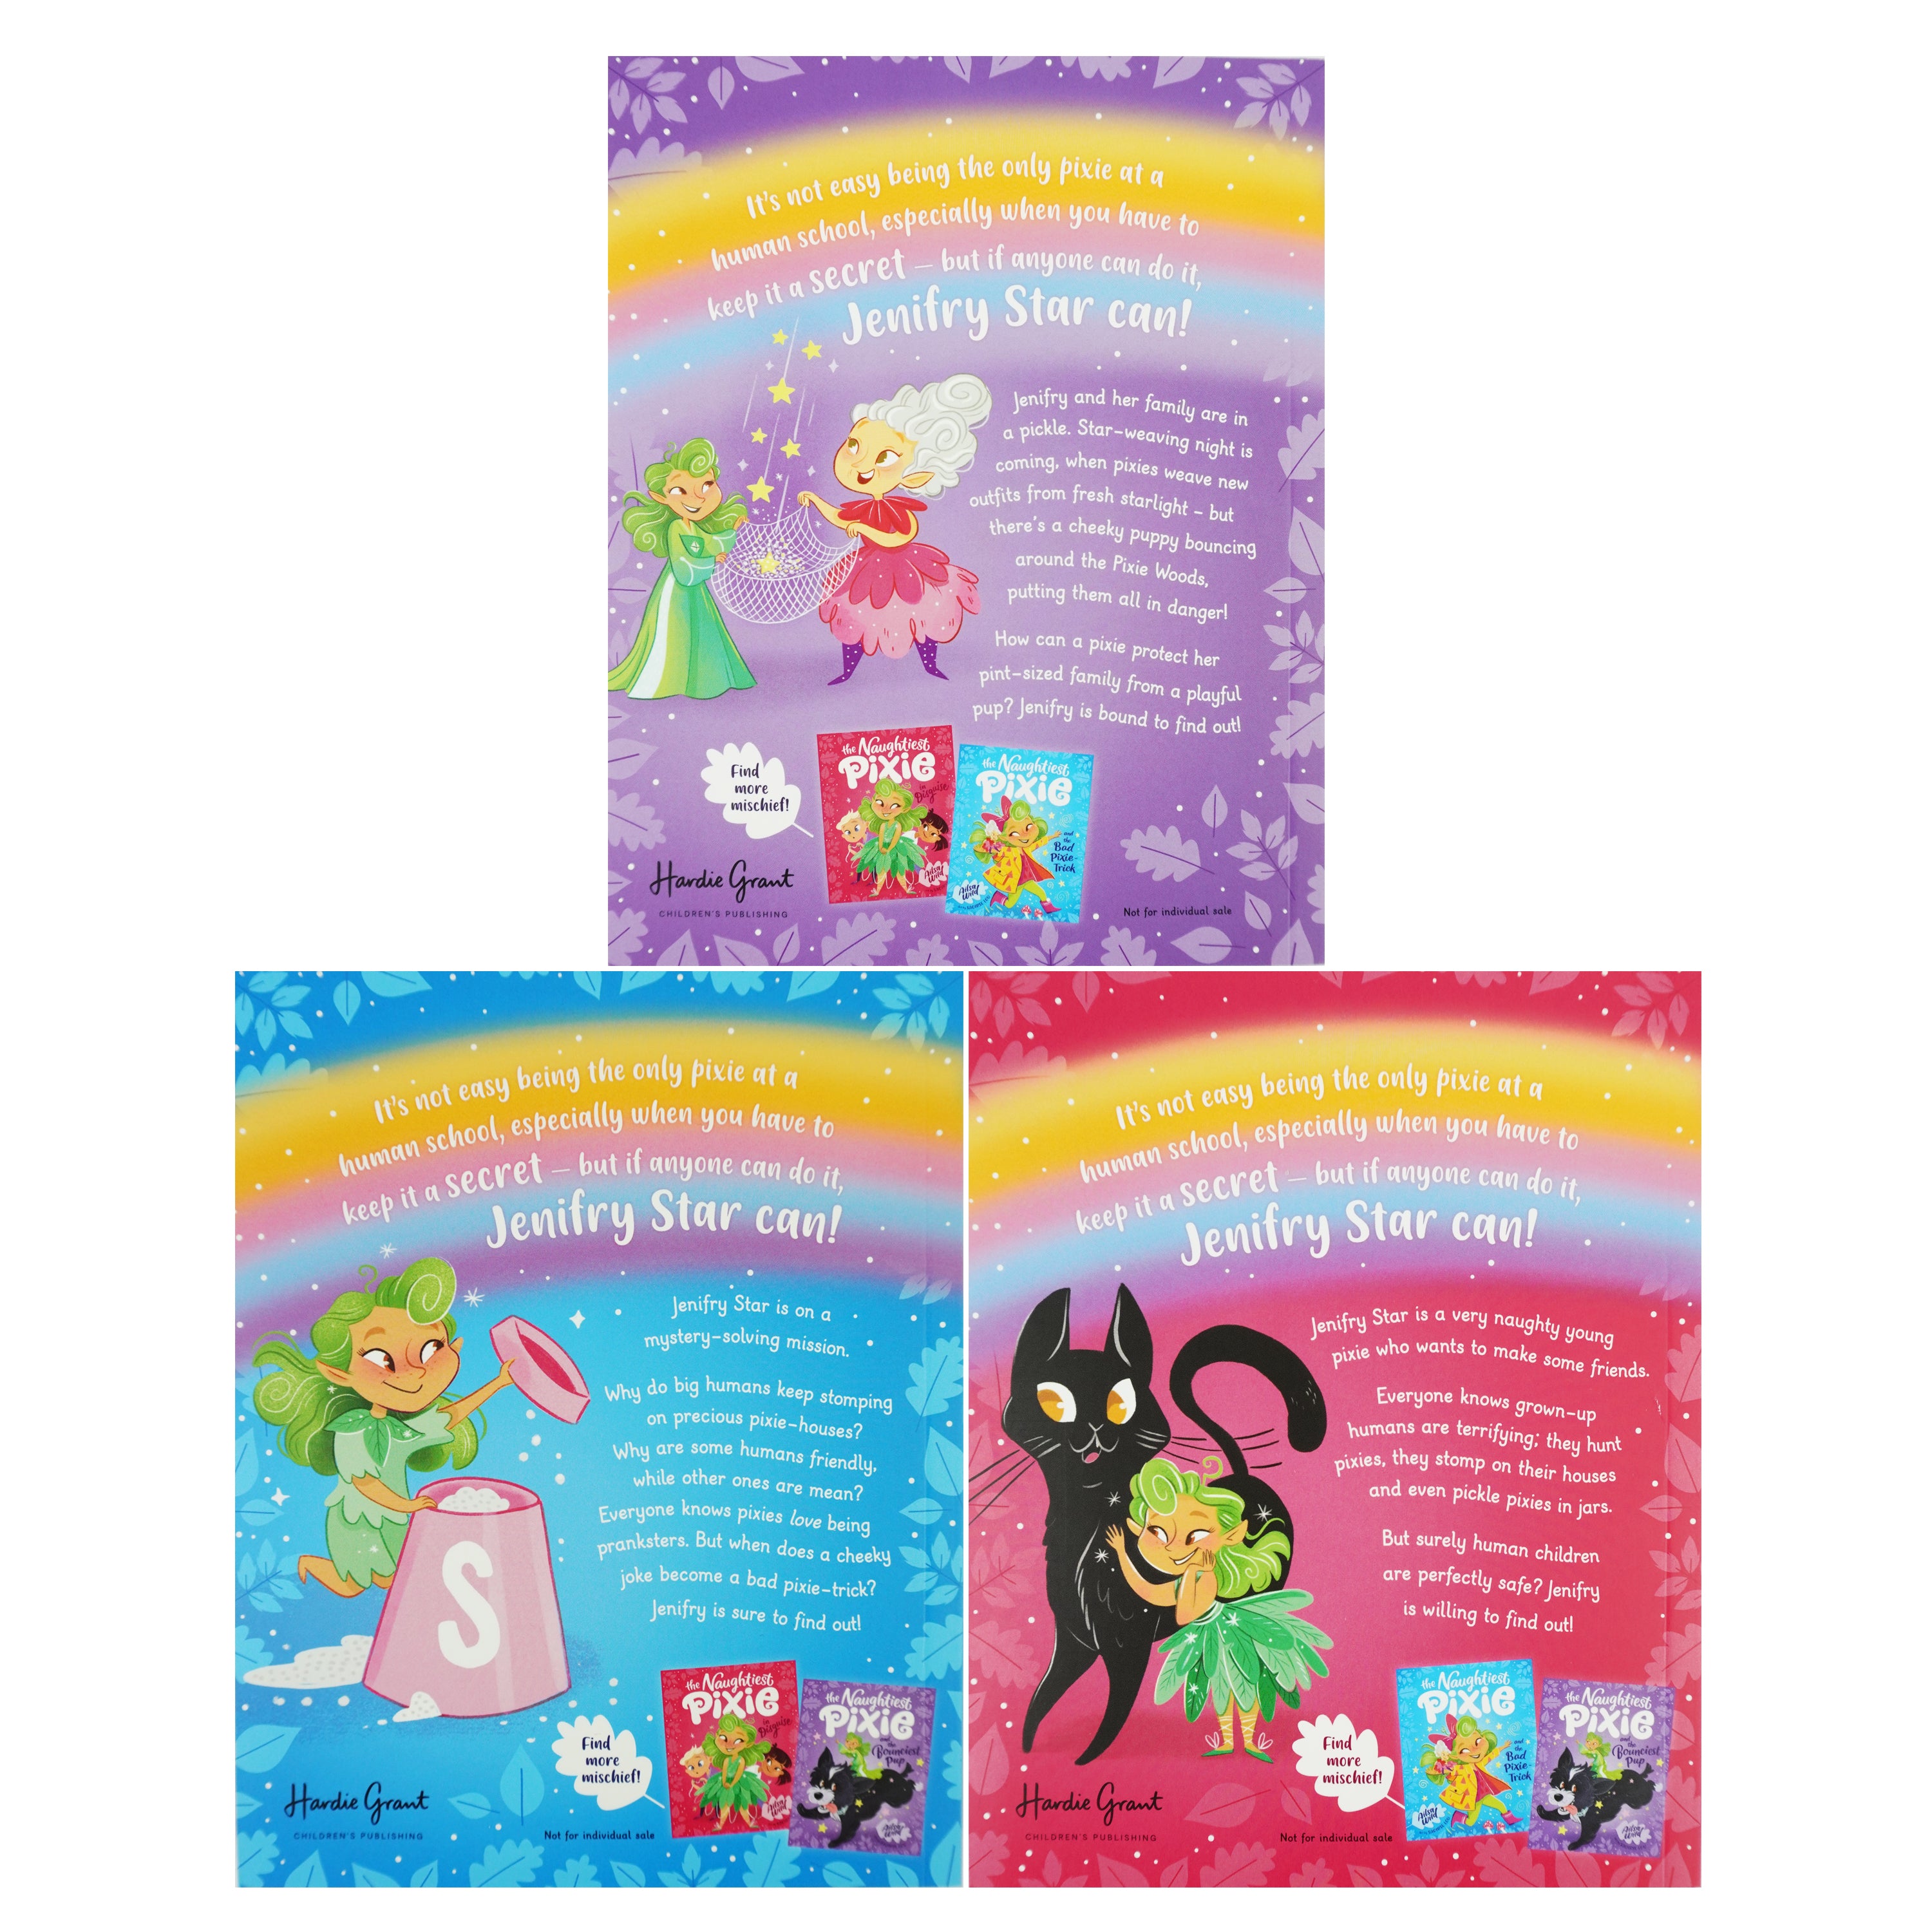 The Naughtiest Pixie Series by Ailsa Wild 3 Books Collection Box Set - Ages 6+ - Paperback